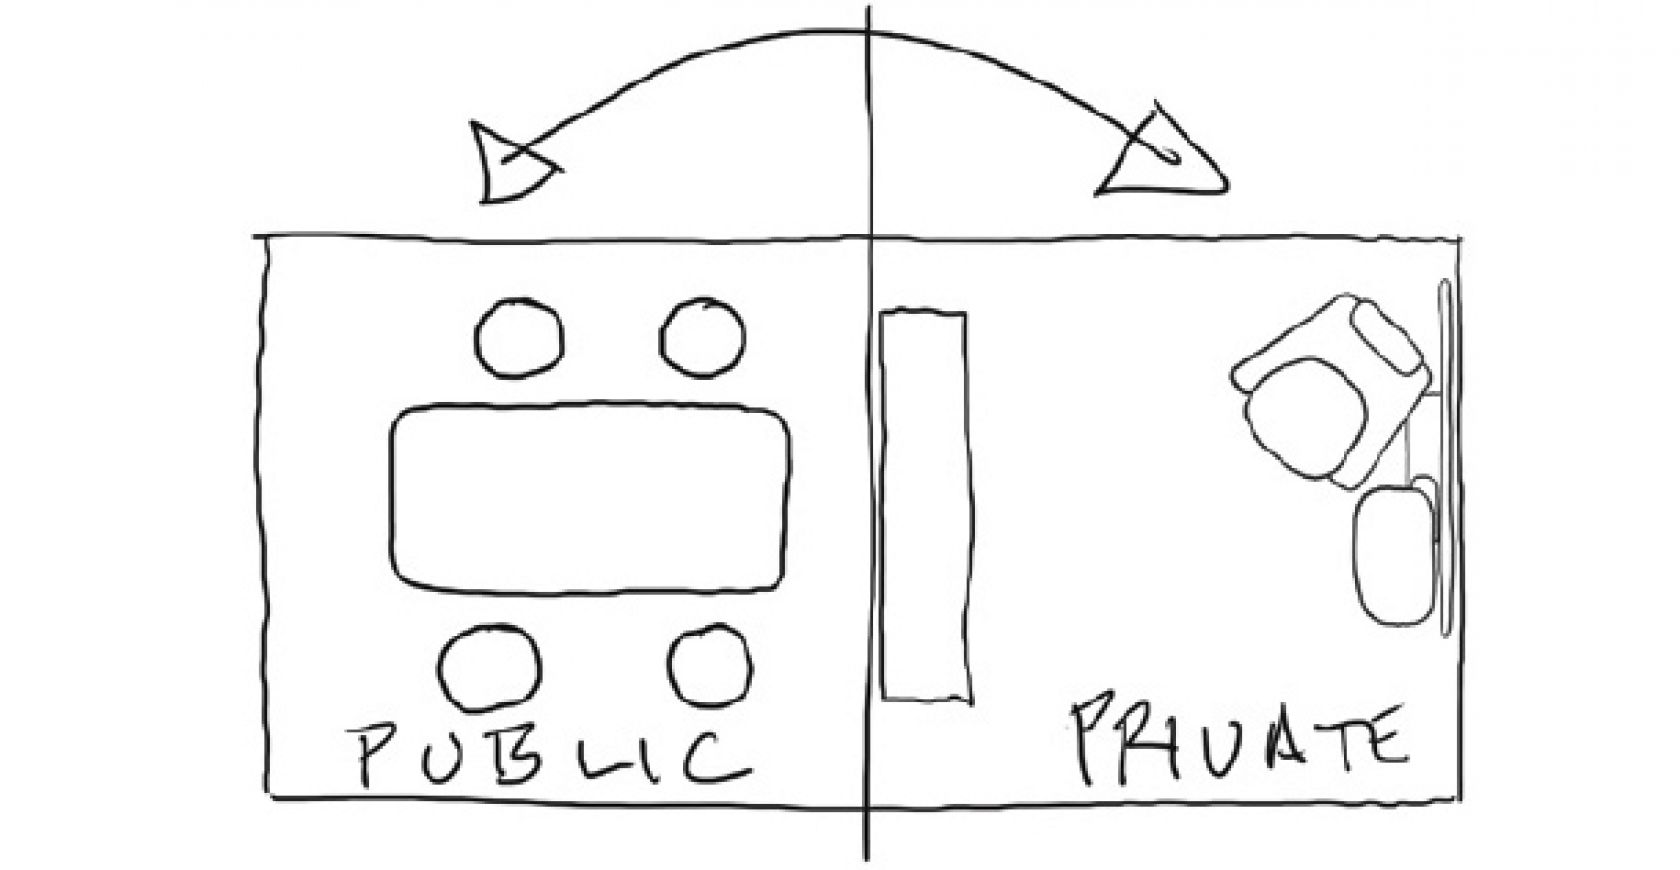 Ports Public to Private Room Sketch